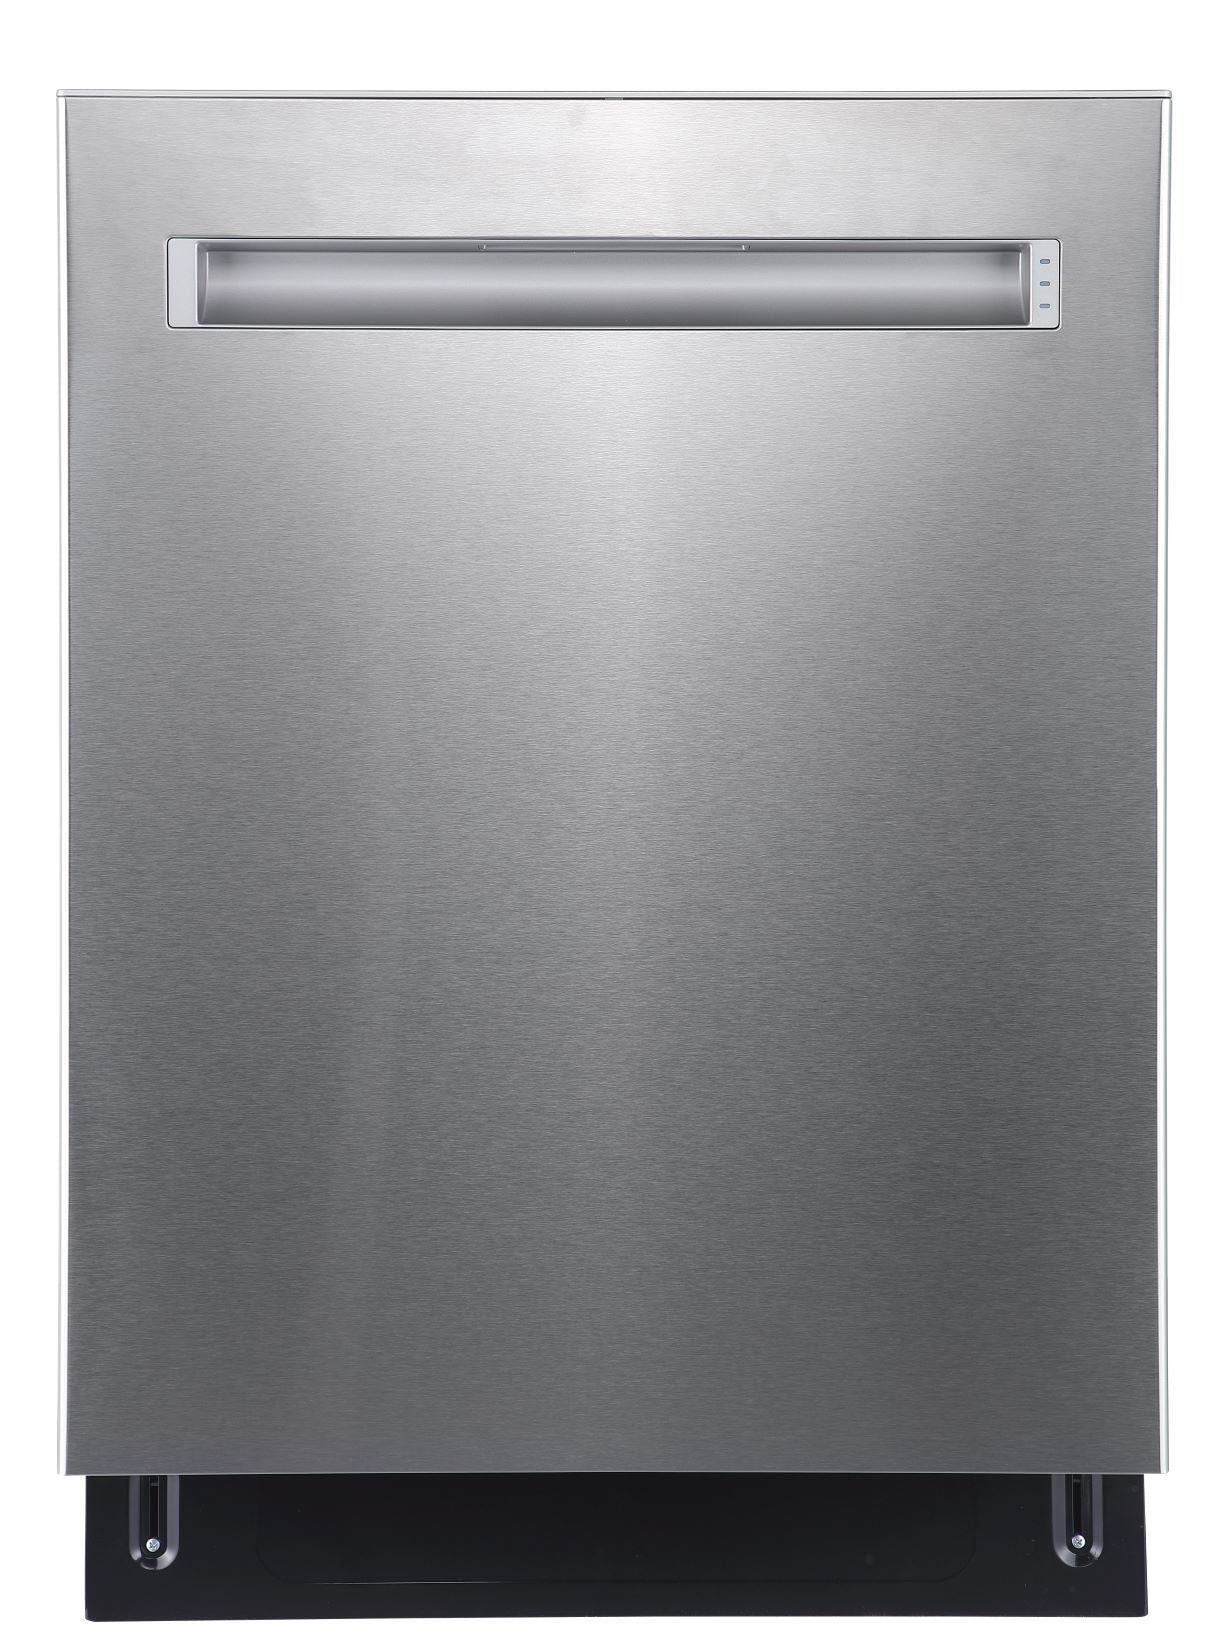 GE Stainless Steel 24" Built-In Top Control Dishwasher - GBP655SSPSS